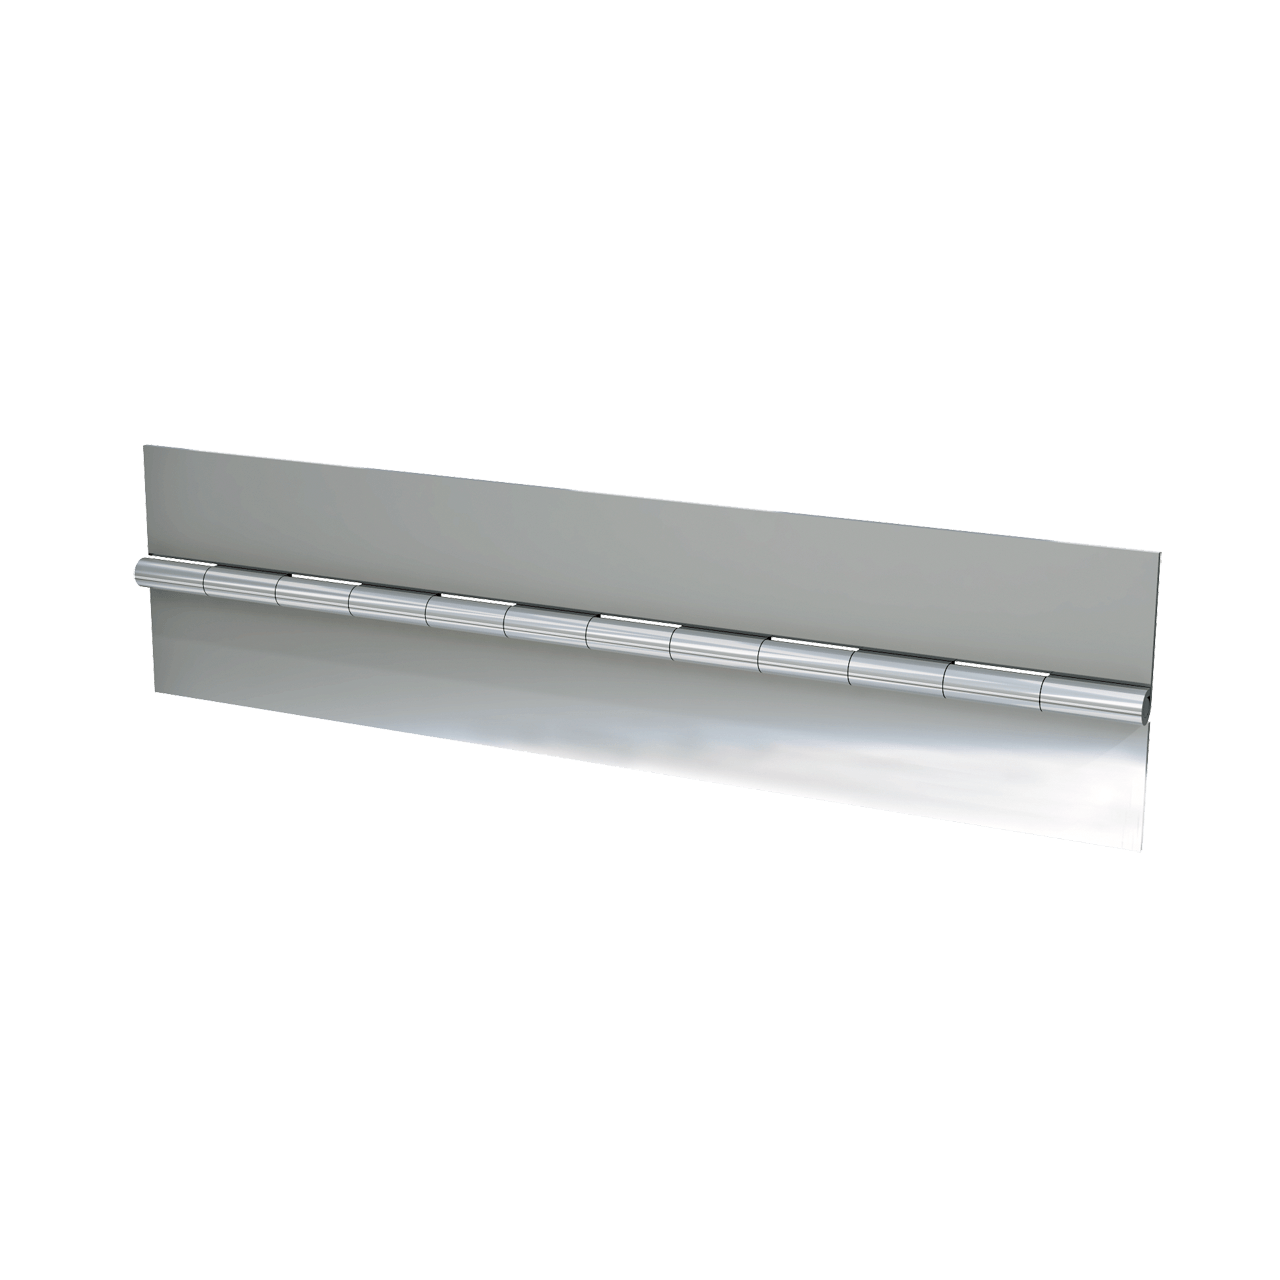 Stainless Steel Continuous Hinge - 0.07" x 3.0" x 72"